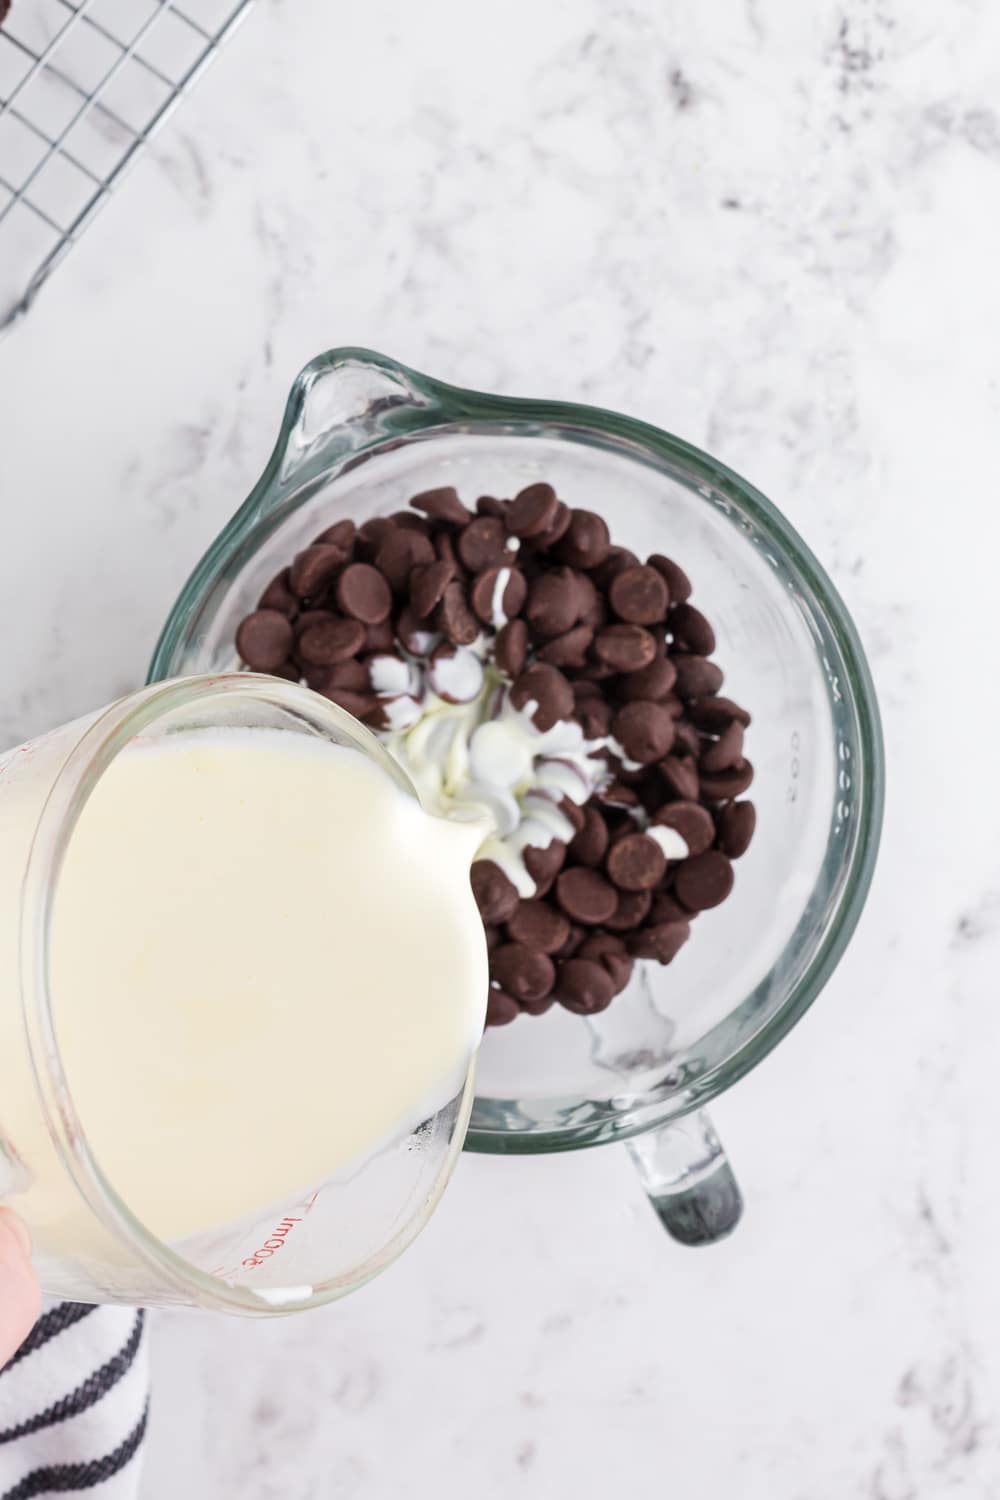 Heavy cream pouring into large glass bowl with chocolate chips.